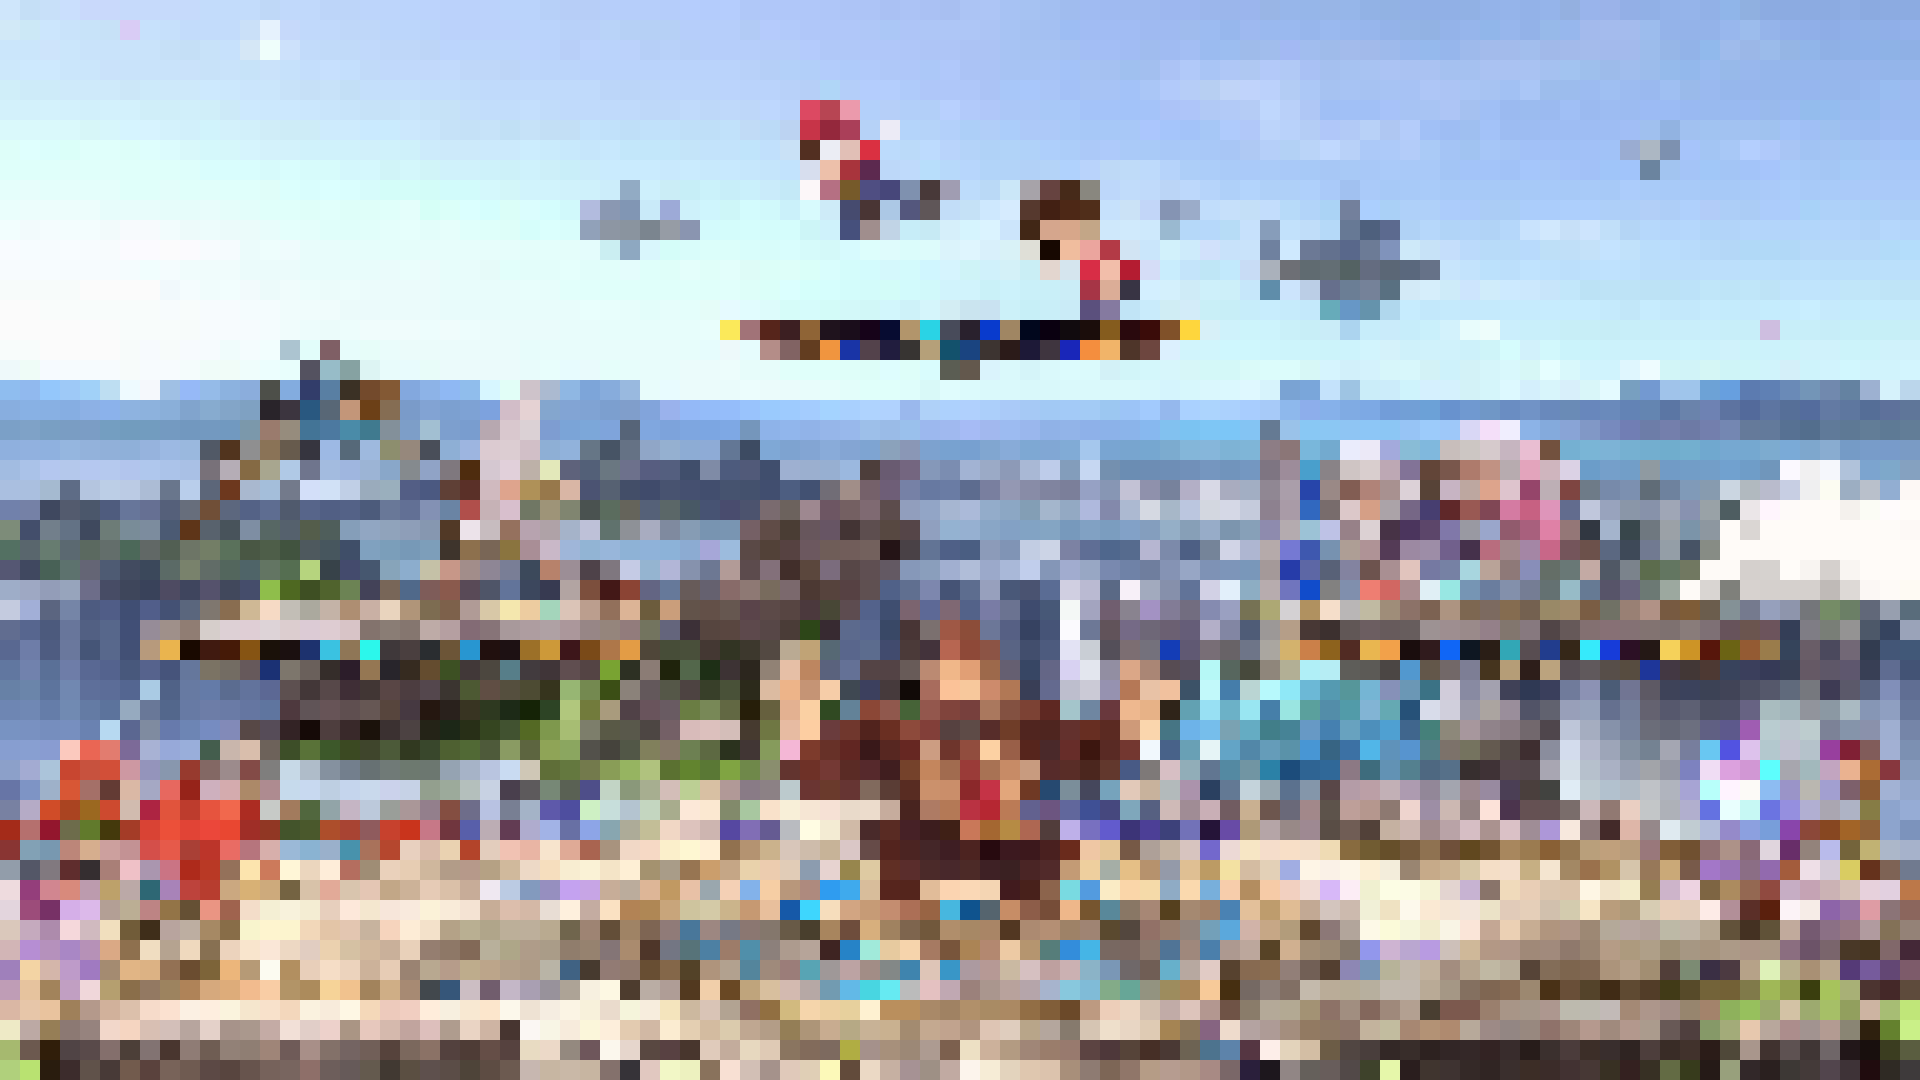 imageonline-co-pixelated (6).png